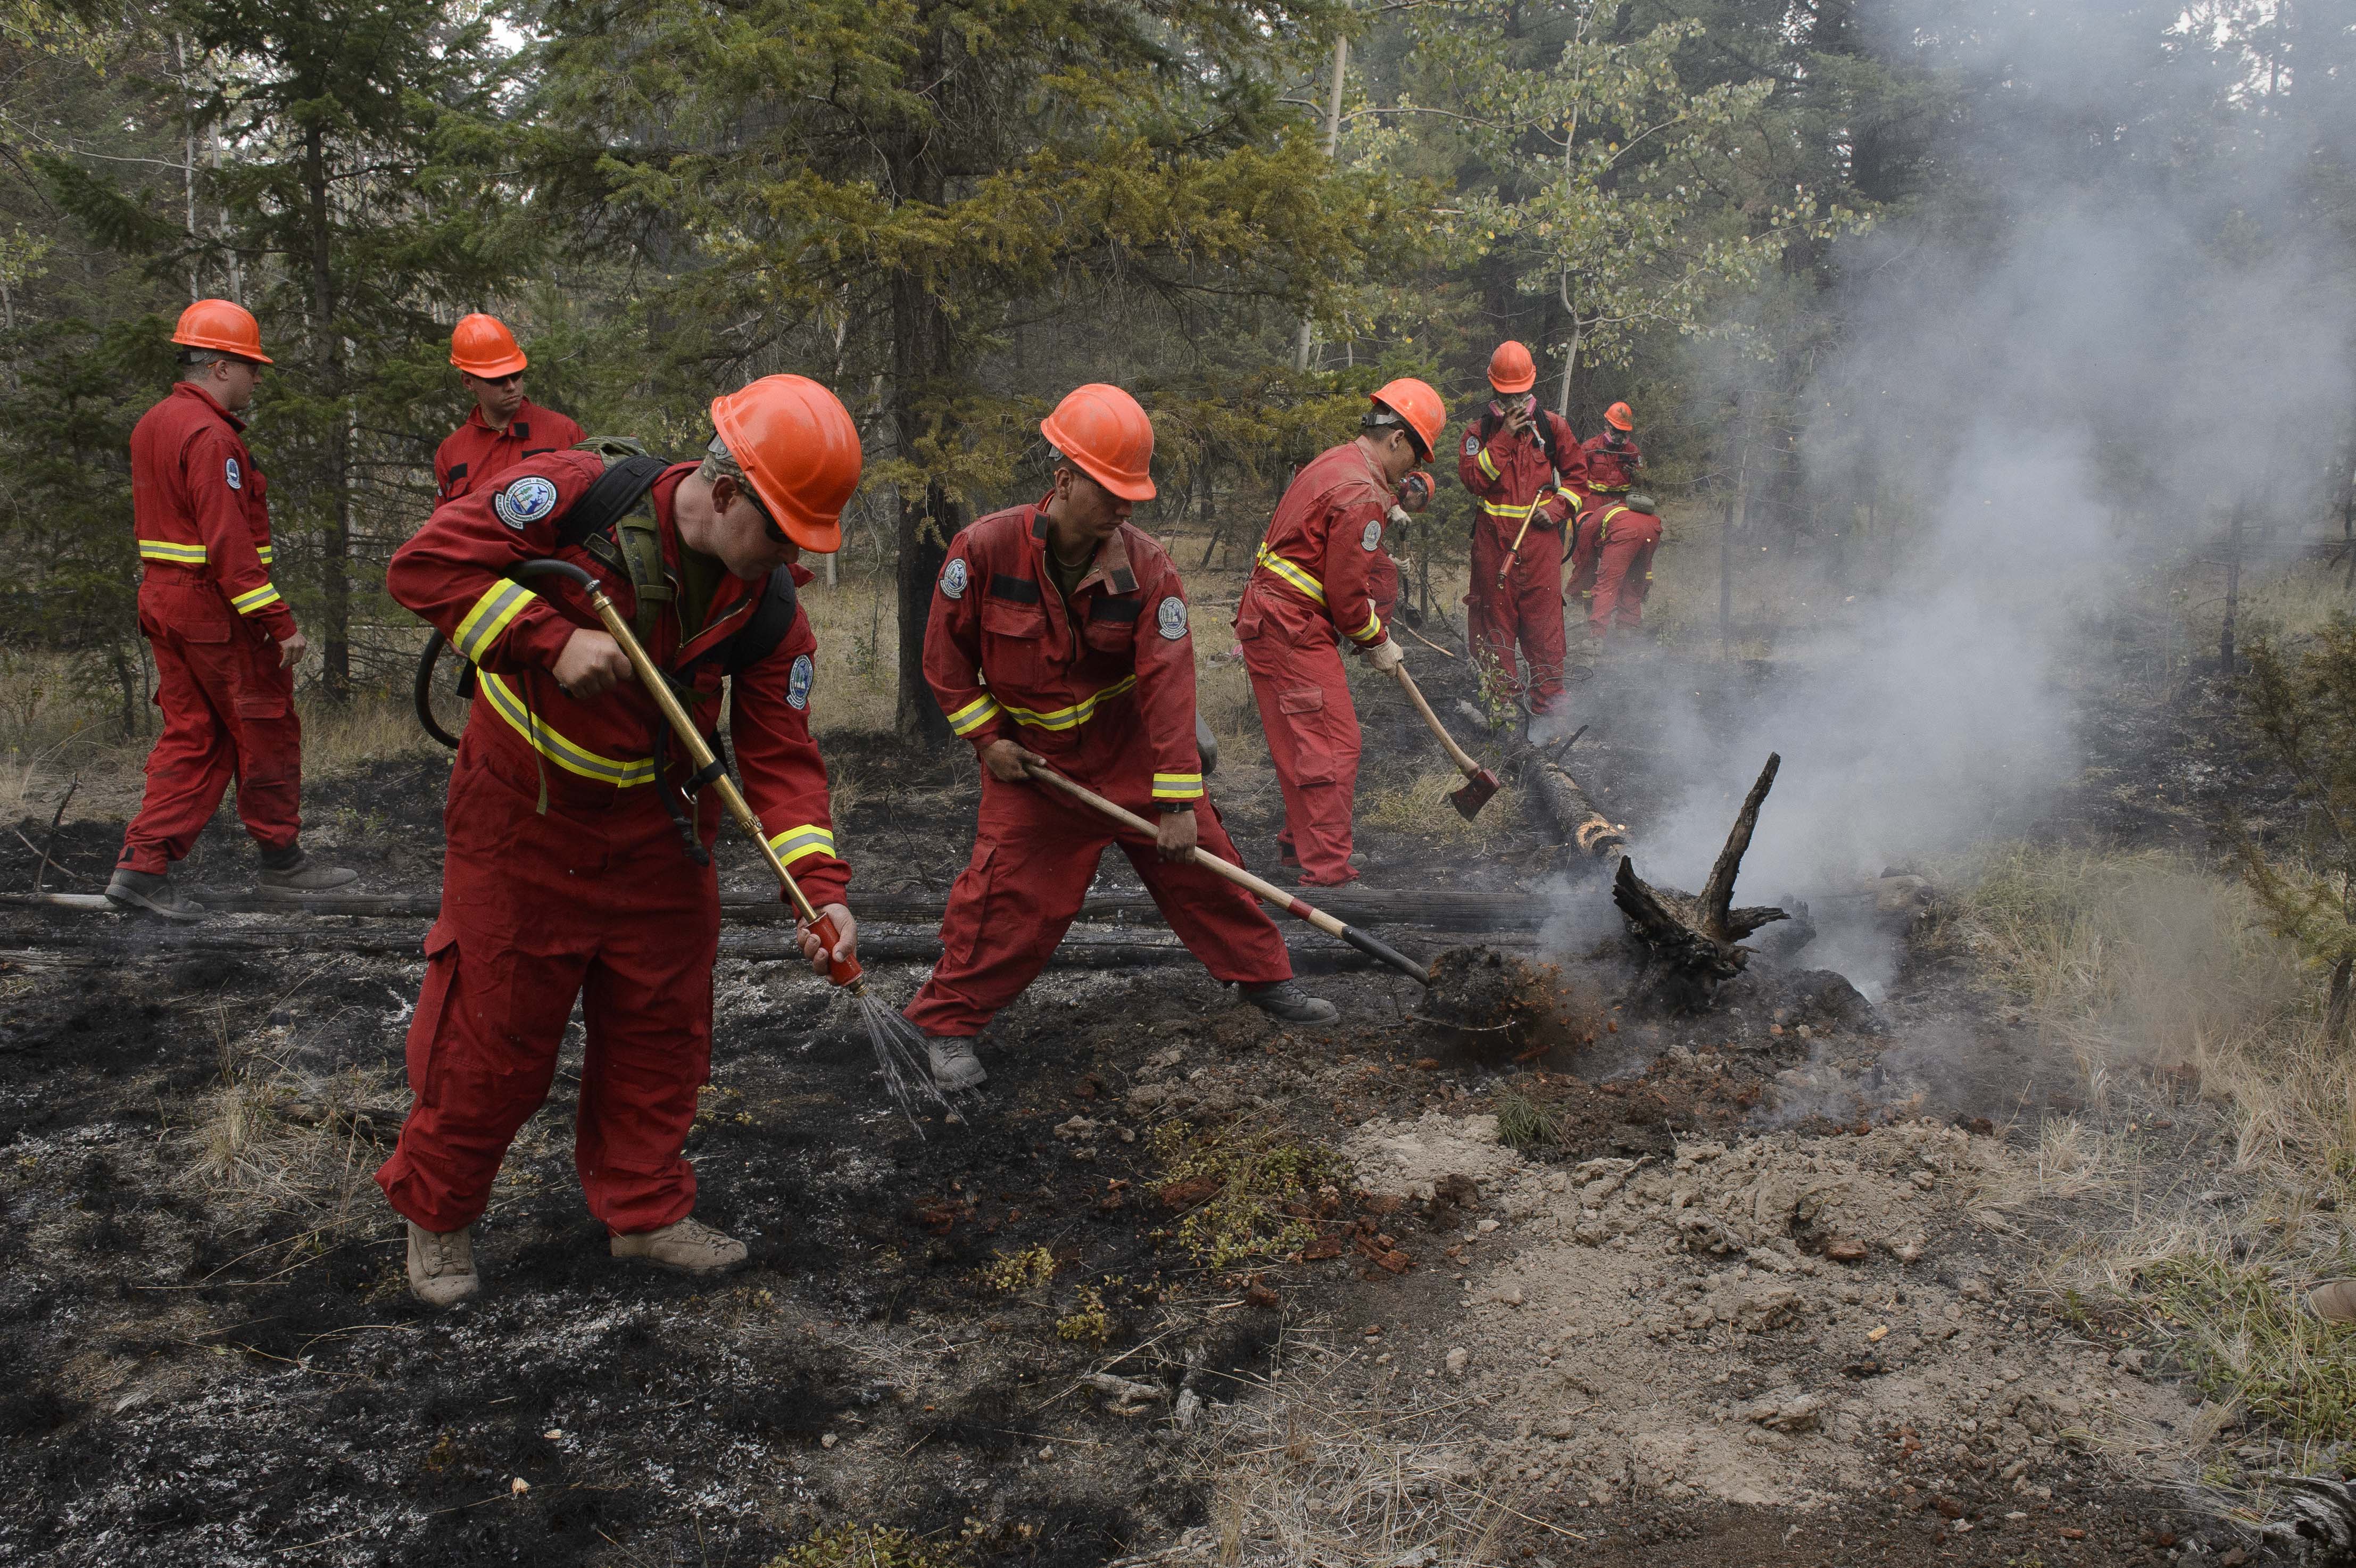 Members of a Domestic Response Company made up of Canadian Army Primary Reserves from all over British Columbia attack a fire hot zone near Riske Creek, BC during OPERATION LENTUS, 17 August, 2017. Photo by: Cpl Blaine Sewell, MARPAC Imaging Services